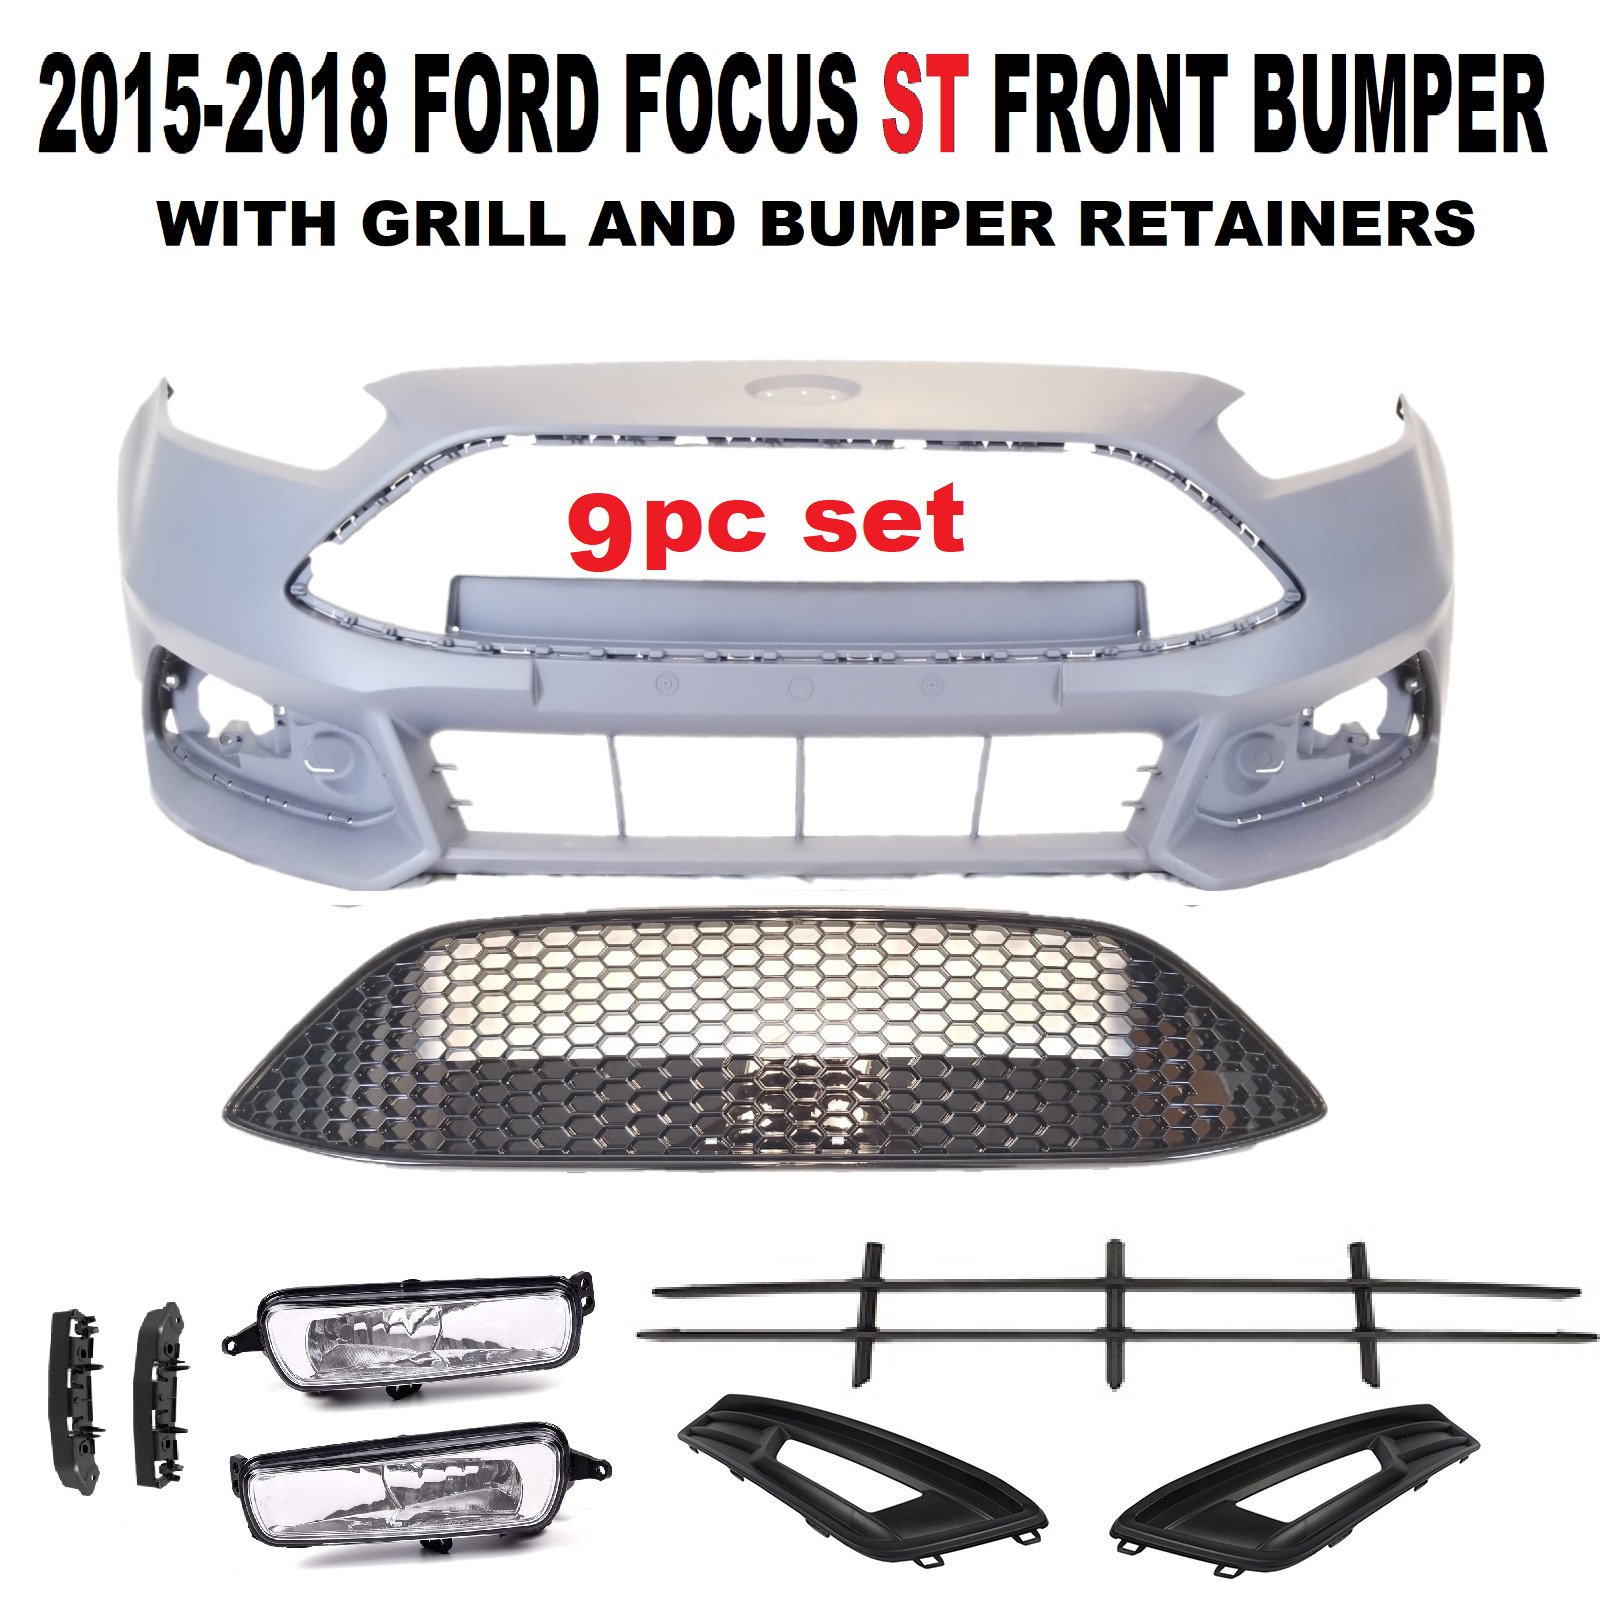 2015 2016 2017 2018 FORD FOCUS ST FRONT BUMPER COVER WITH GRILL